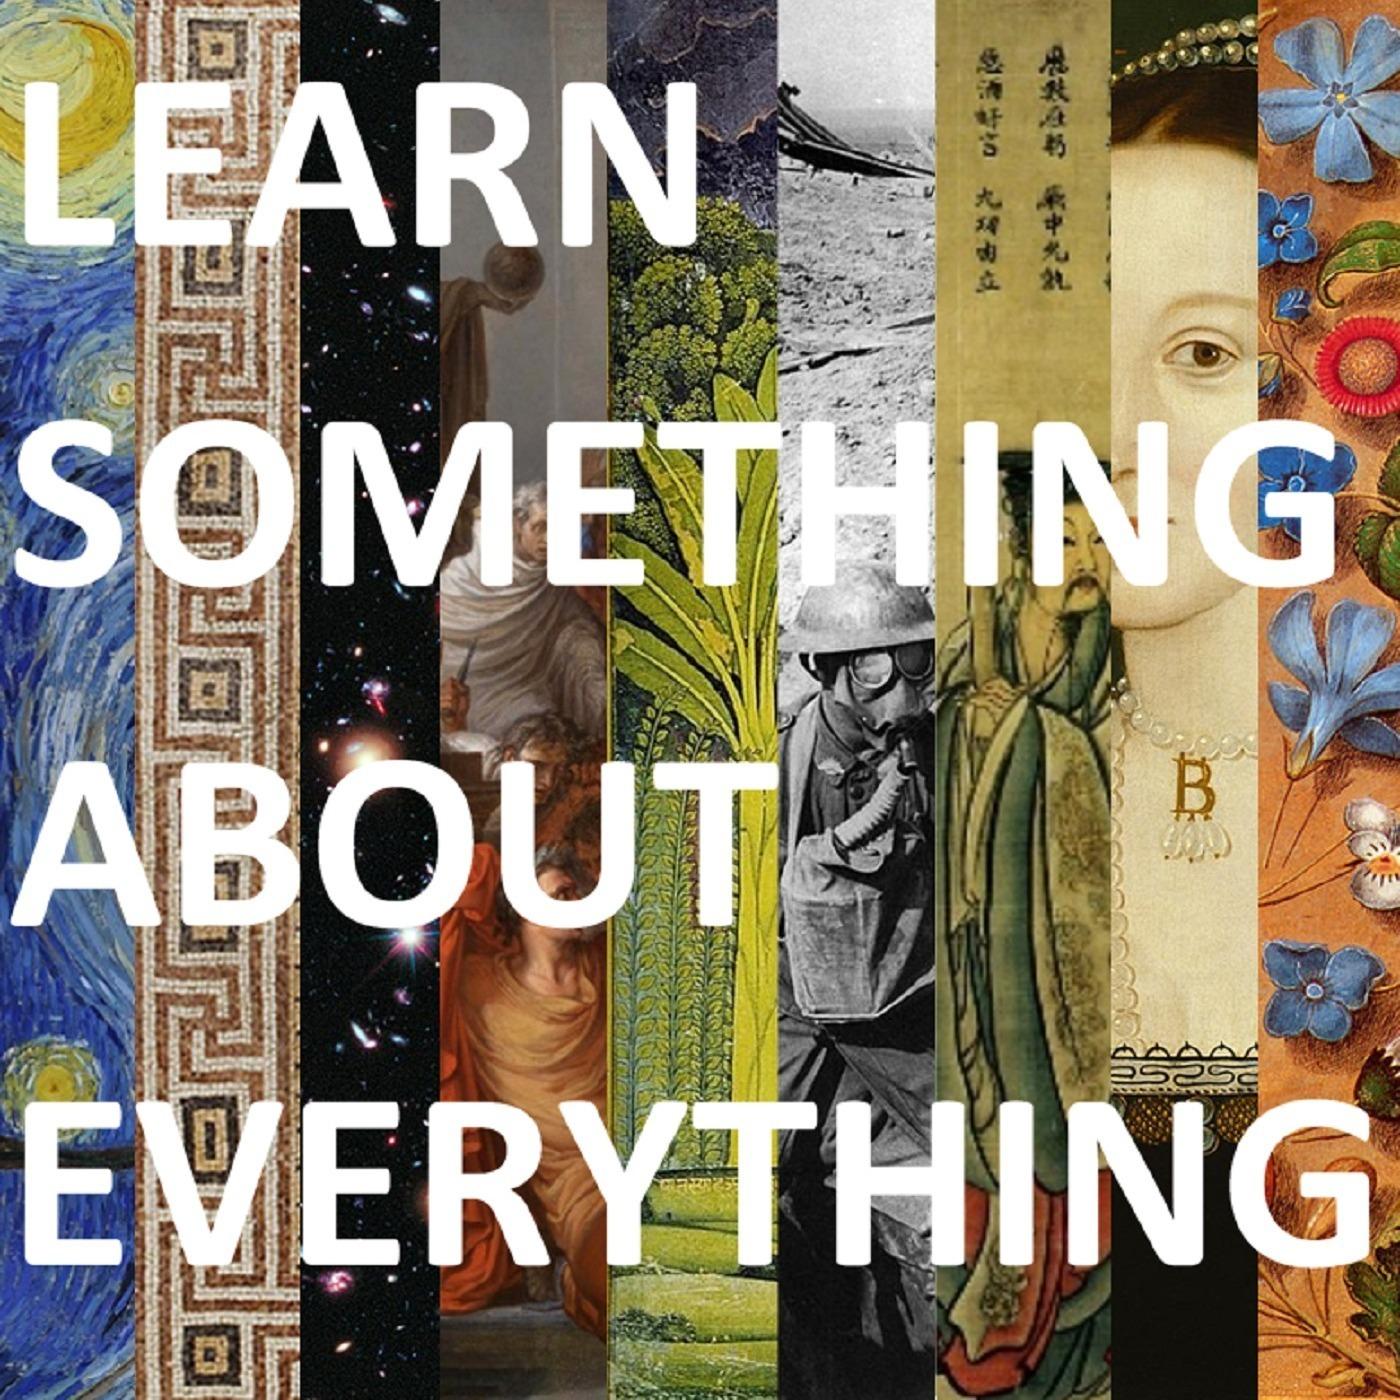 Learn Something About Everything